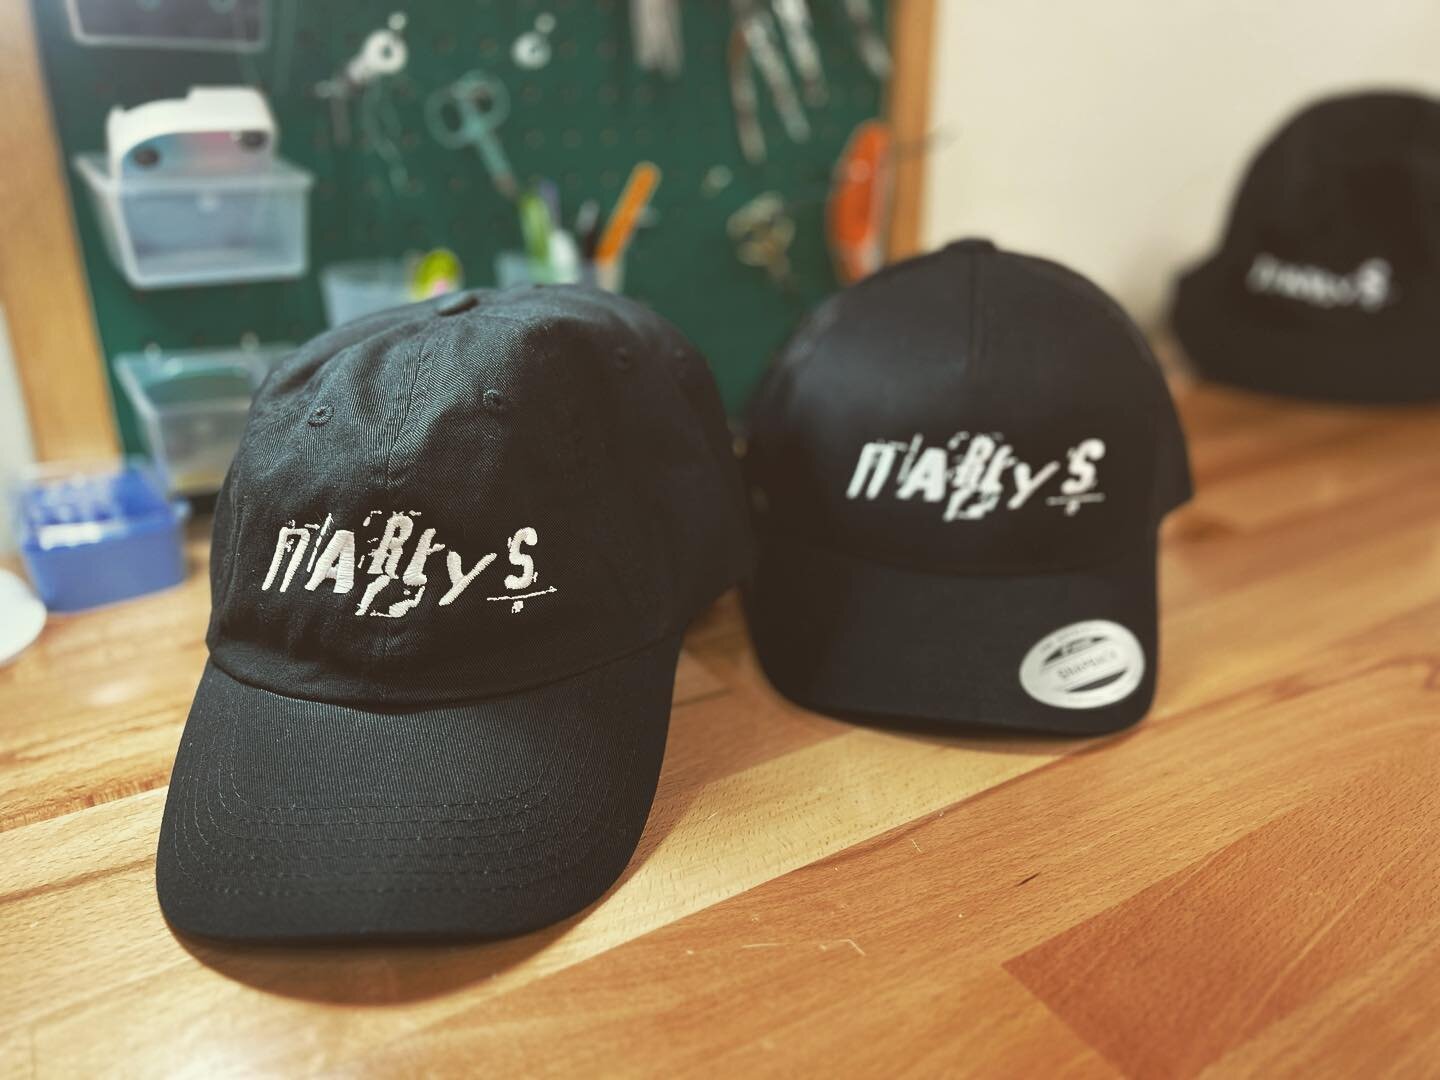 Embroidered hats for Roswells newest food truck @narlysfoodtruck 
.
.
.
#moonmanprinting #moonmanembroidery #roswellnewmexico #roswellnm #downtownroswellnm #mainstreetroswell #embroidery #embroideredhats #yupoong #melco #narlysfoodtruck